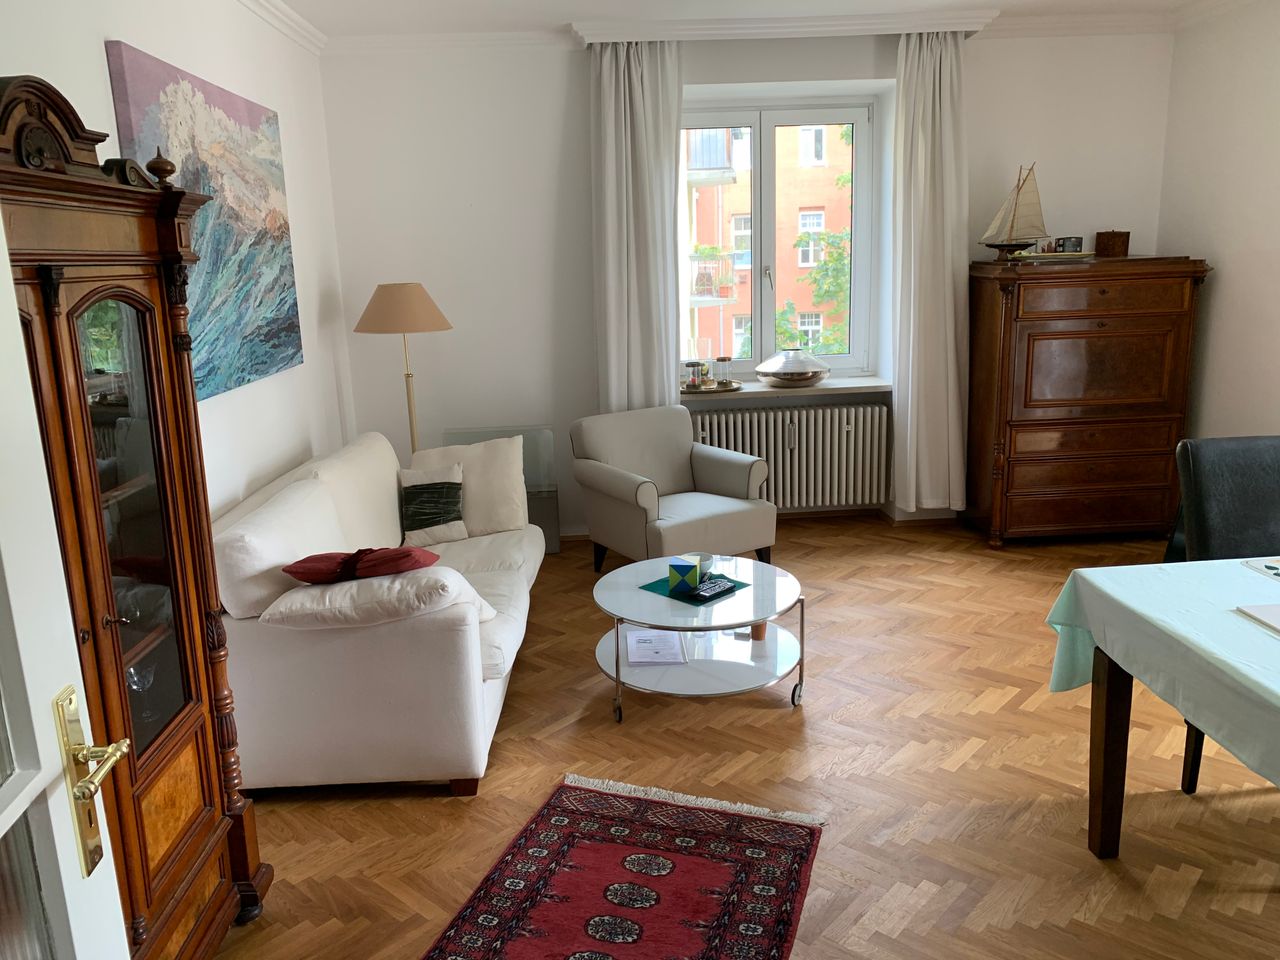 Fantastic & nice apartment located in München